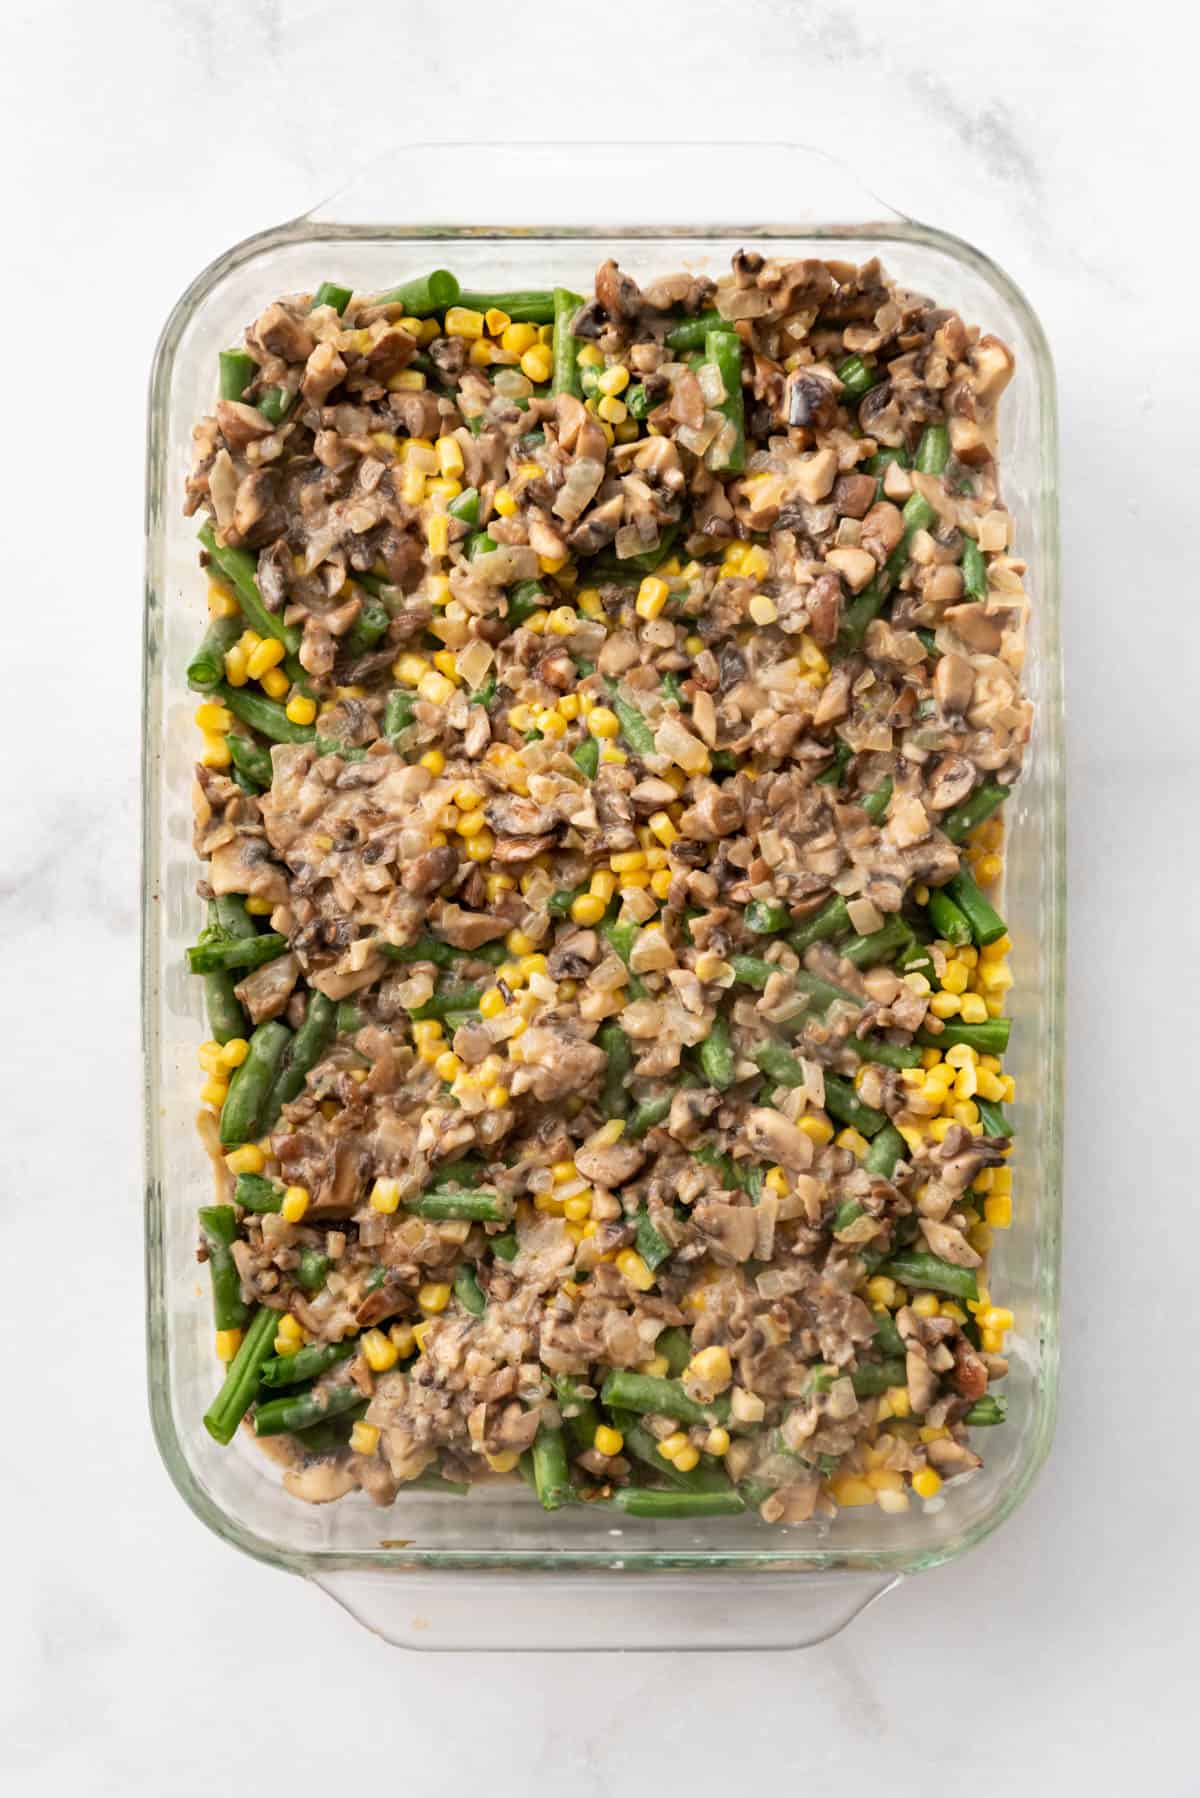 Ground beef in a creamy sauce spread over green beans and corn in a casserole dish.